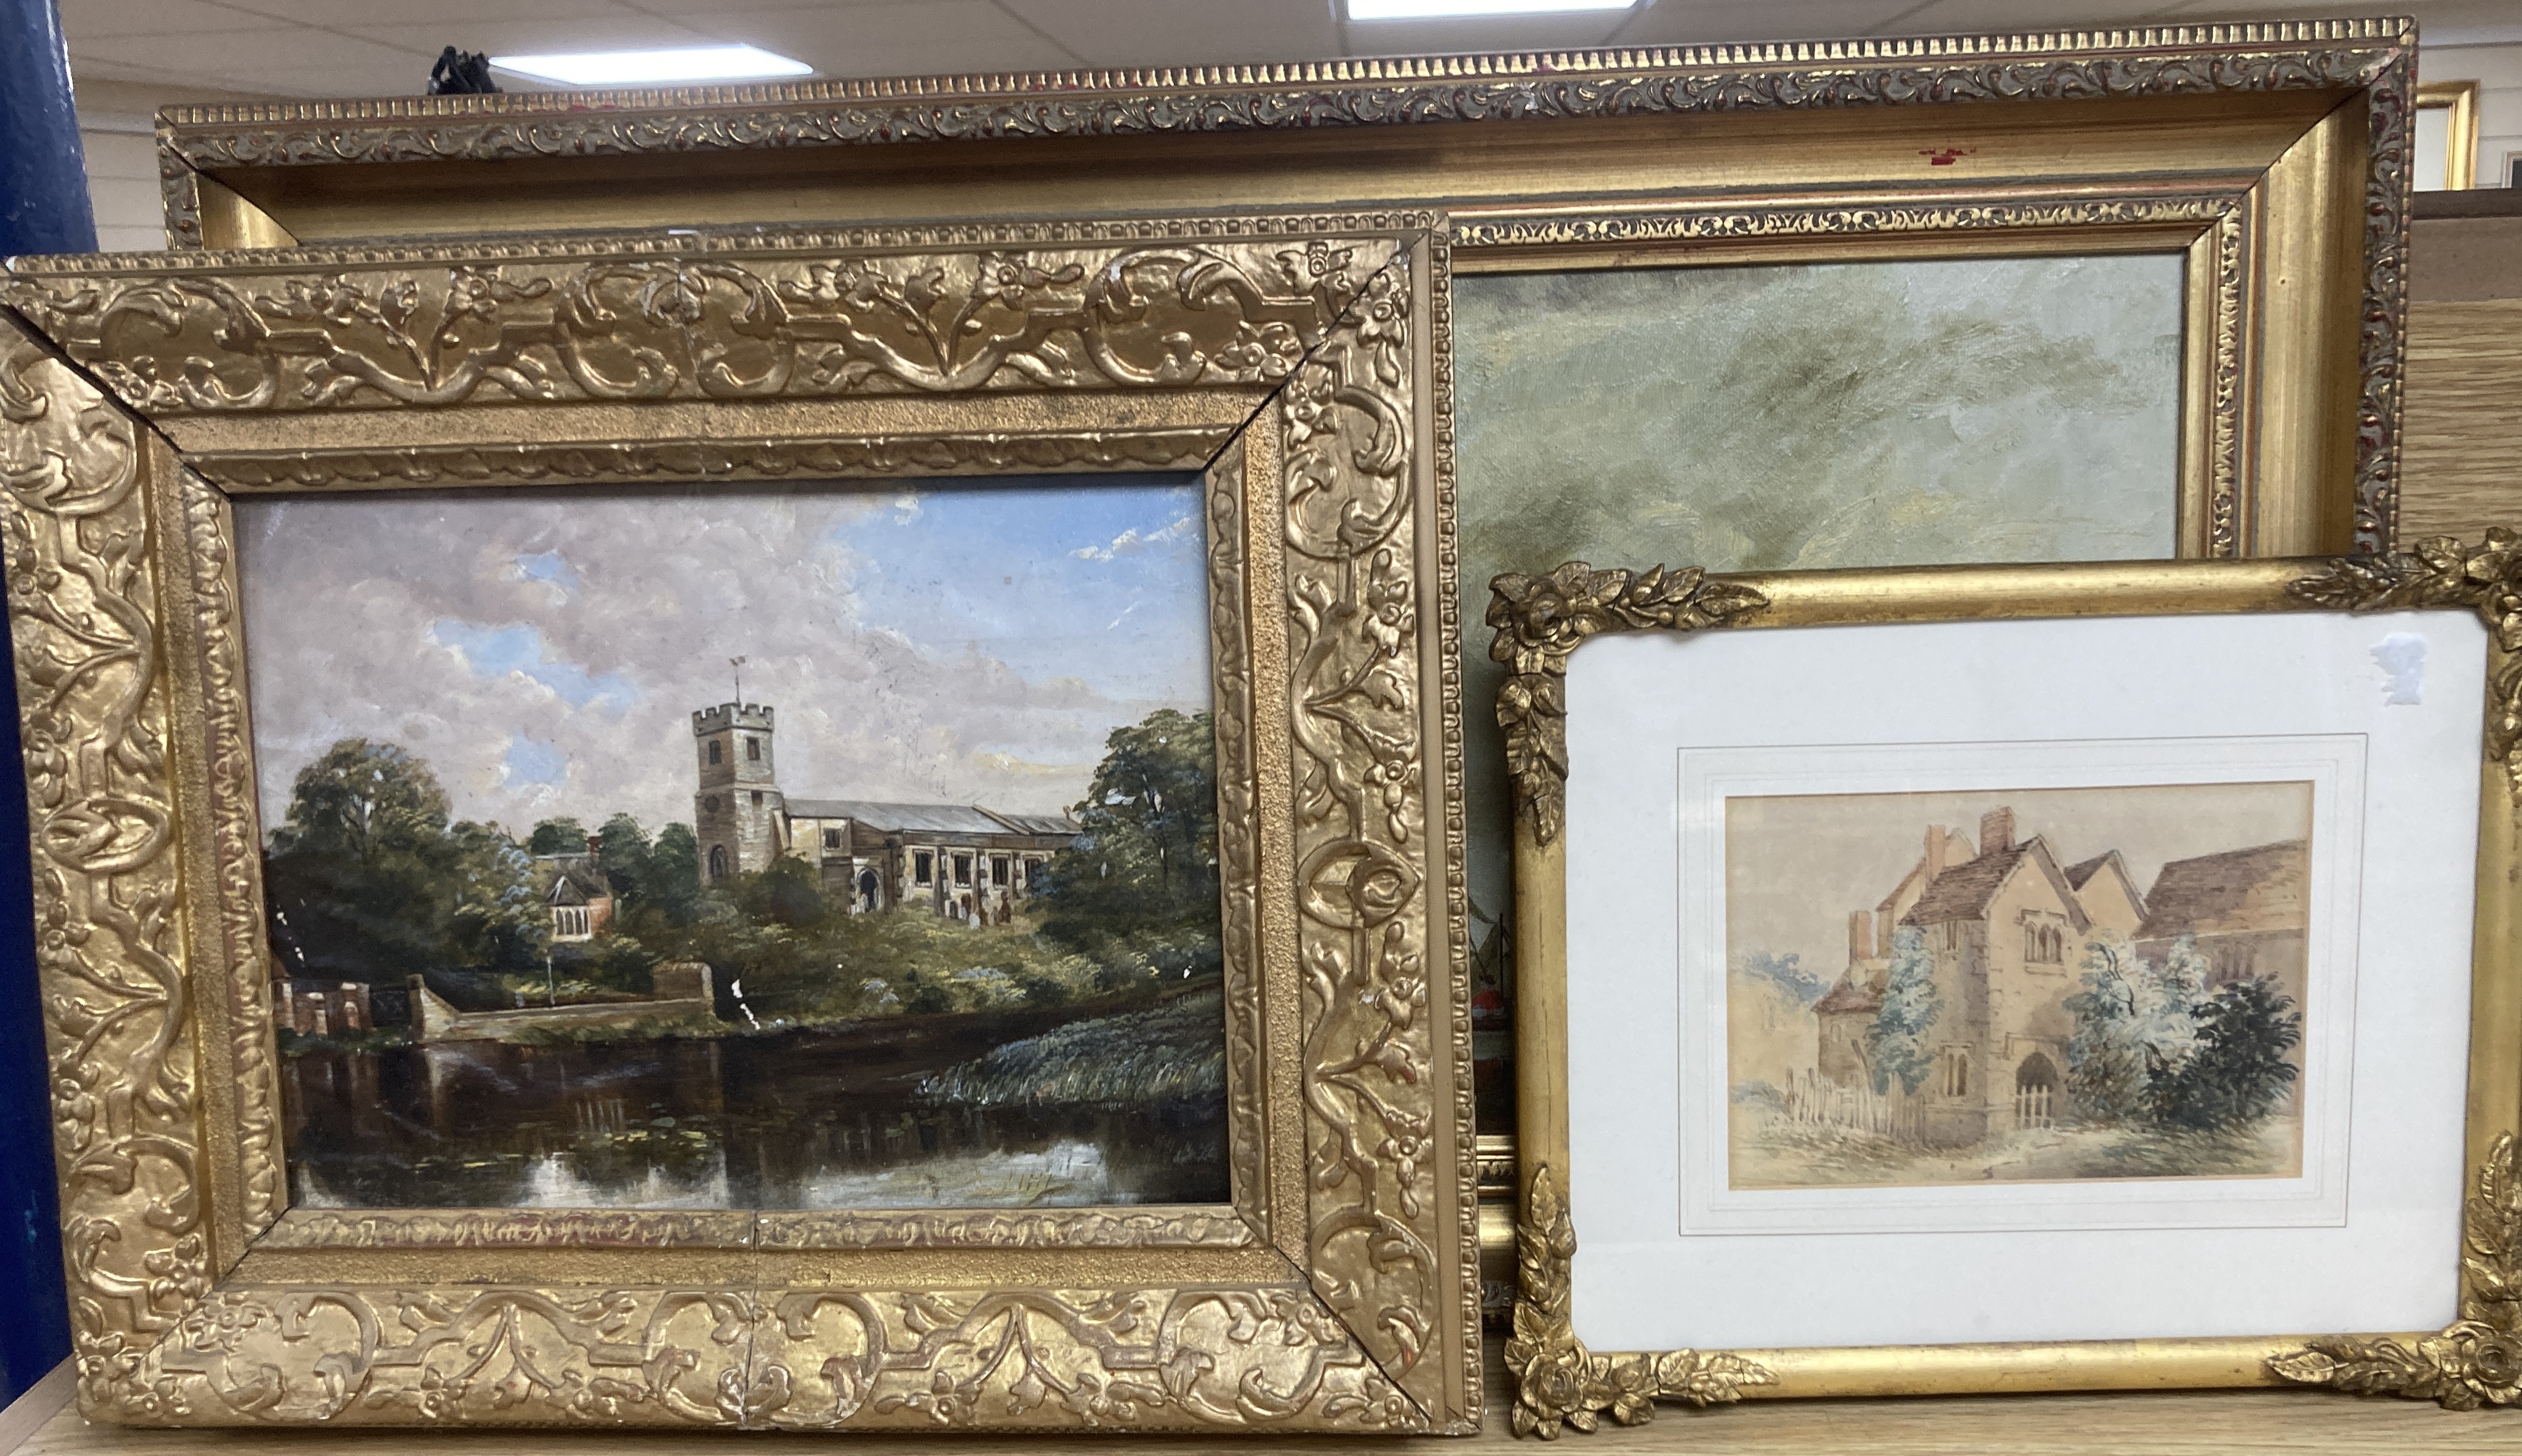 B.A. Richmond, oil on canvas, 17th century style Dutch river landscape, 30 x 60cm, an oil of a riverside church, c.1900 and a small watercolour of a cottage